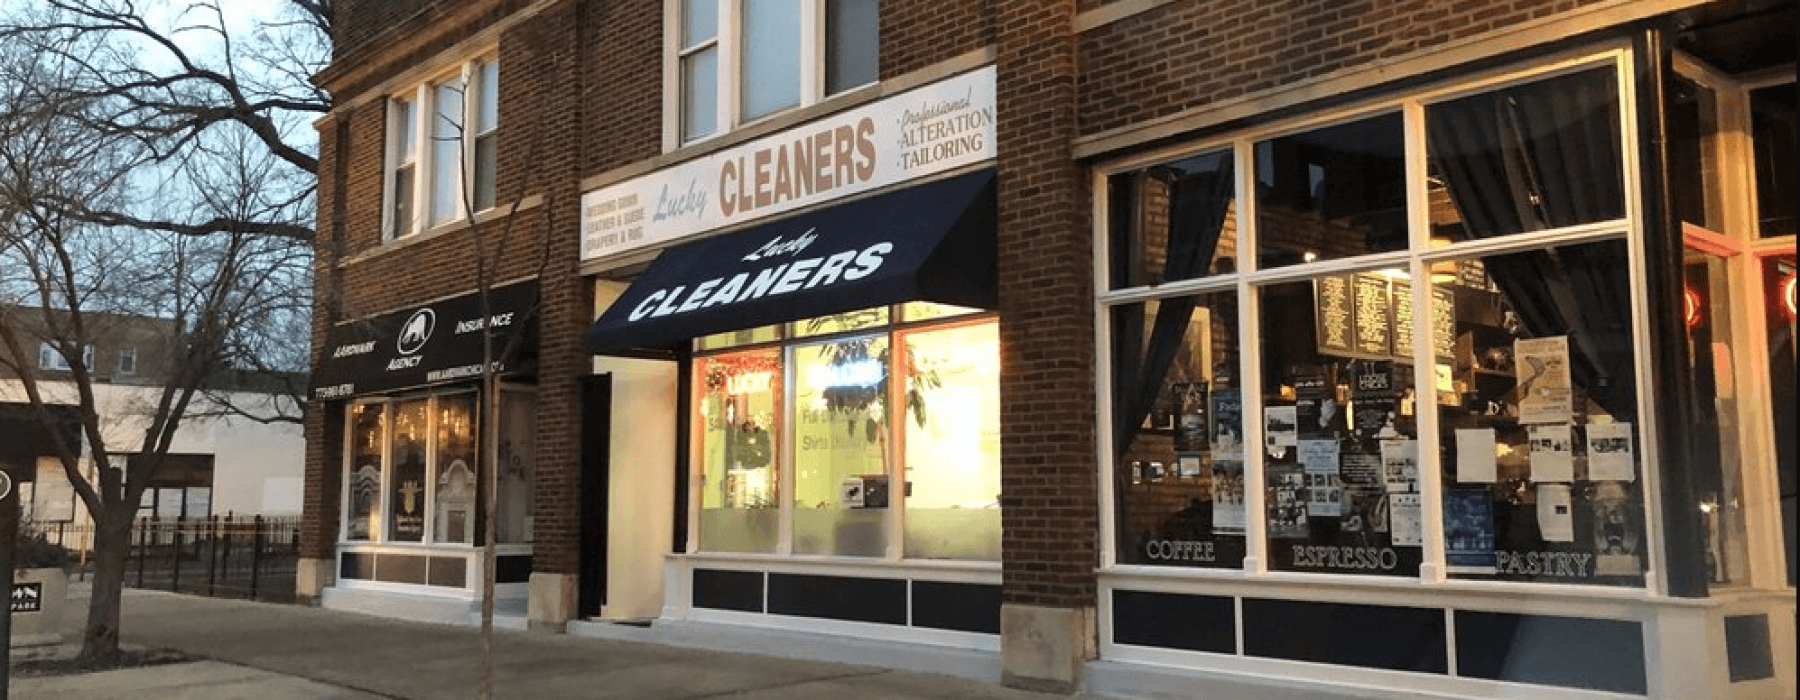 The best dry cleaners in Uptown Chicago